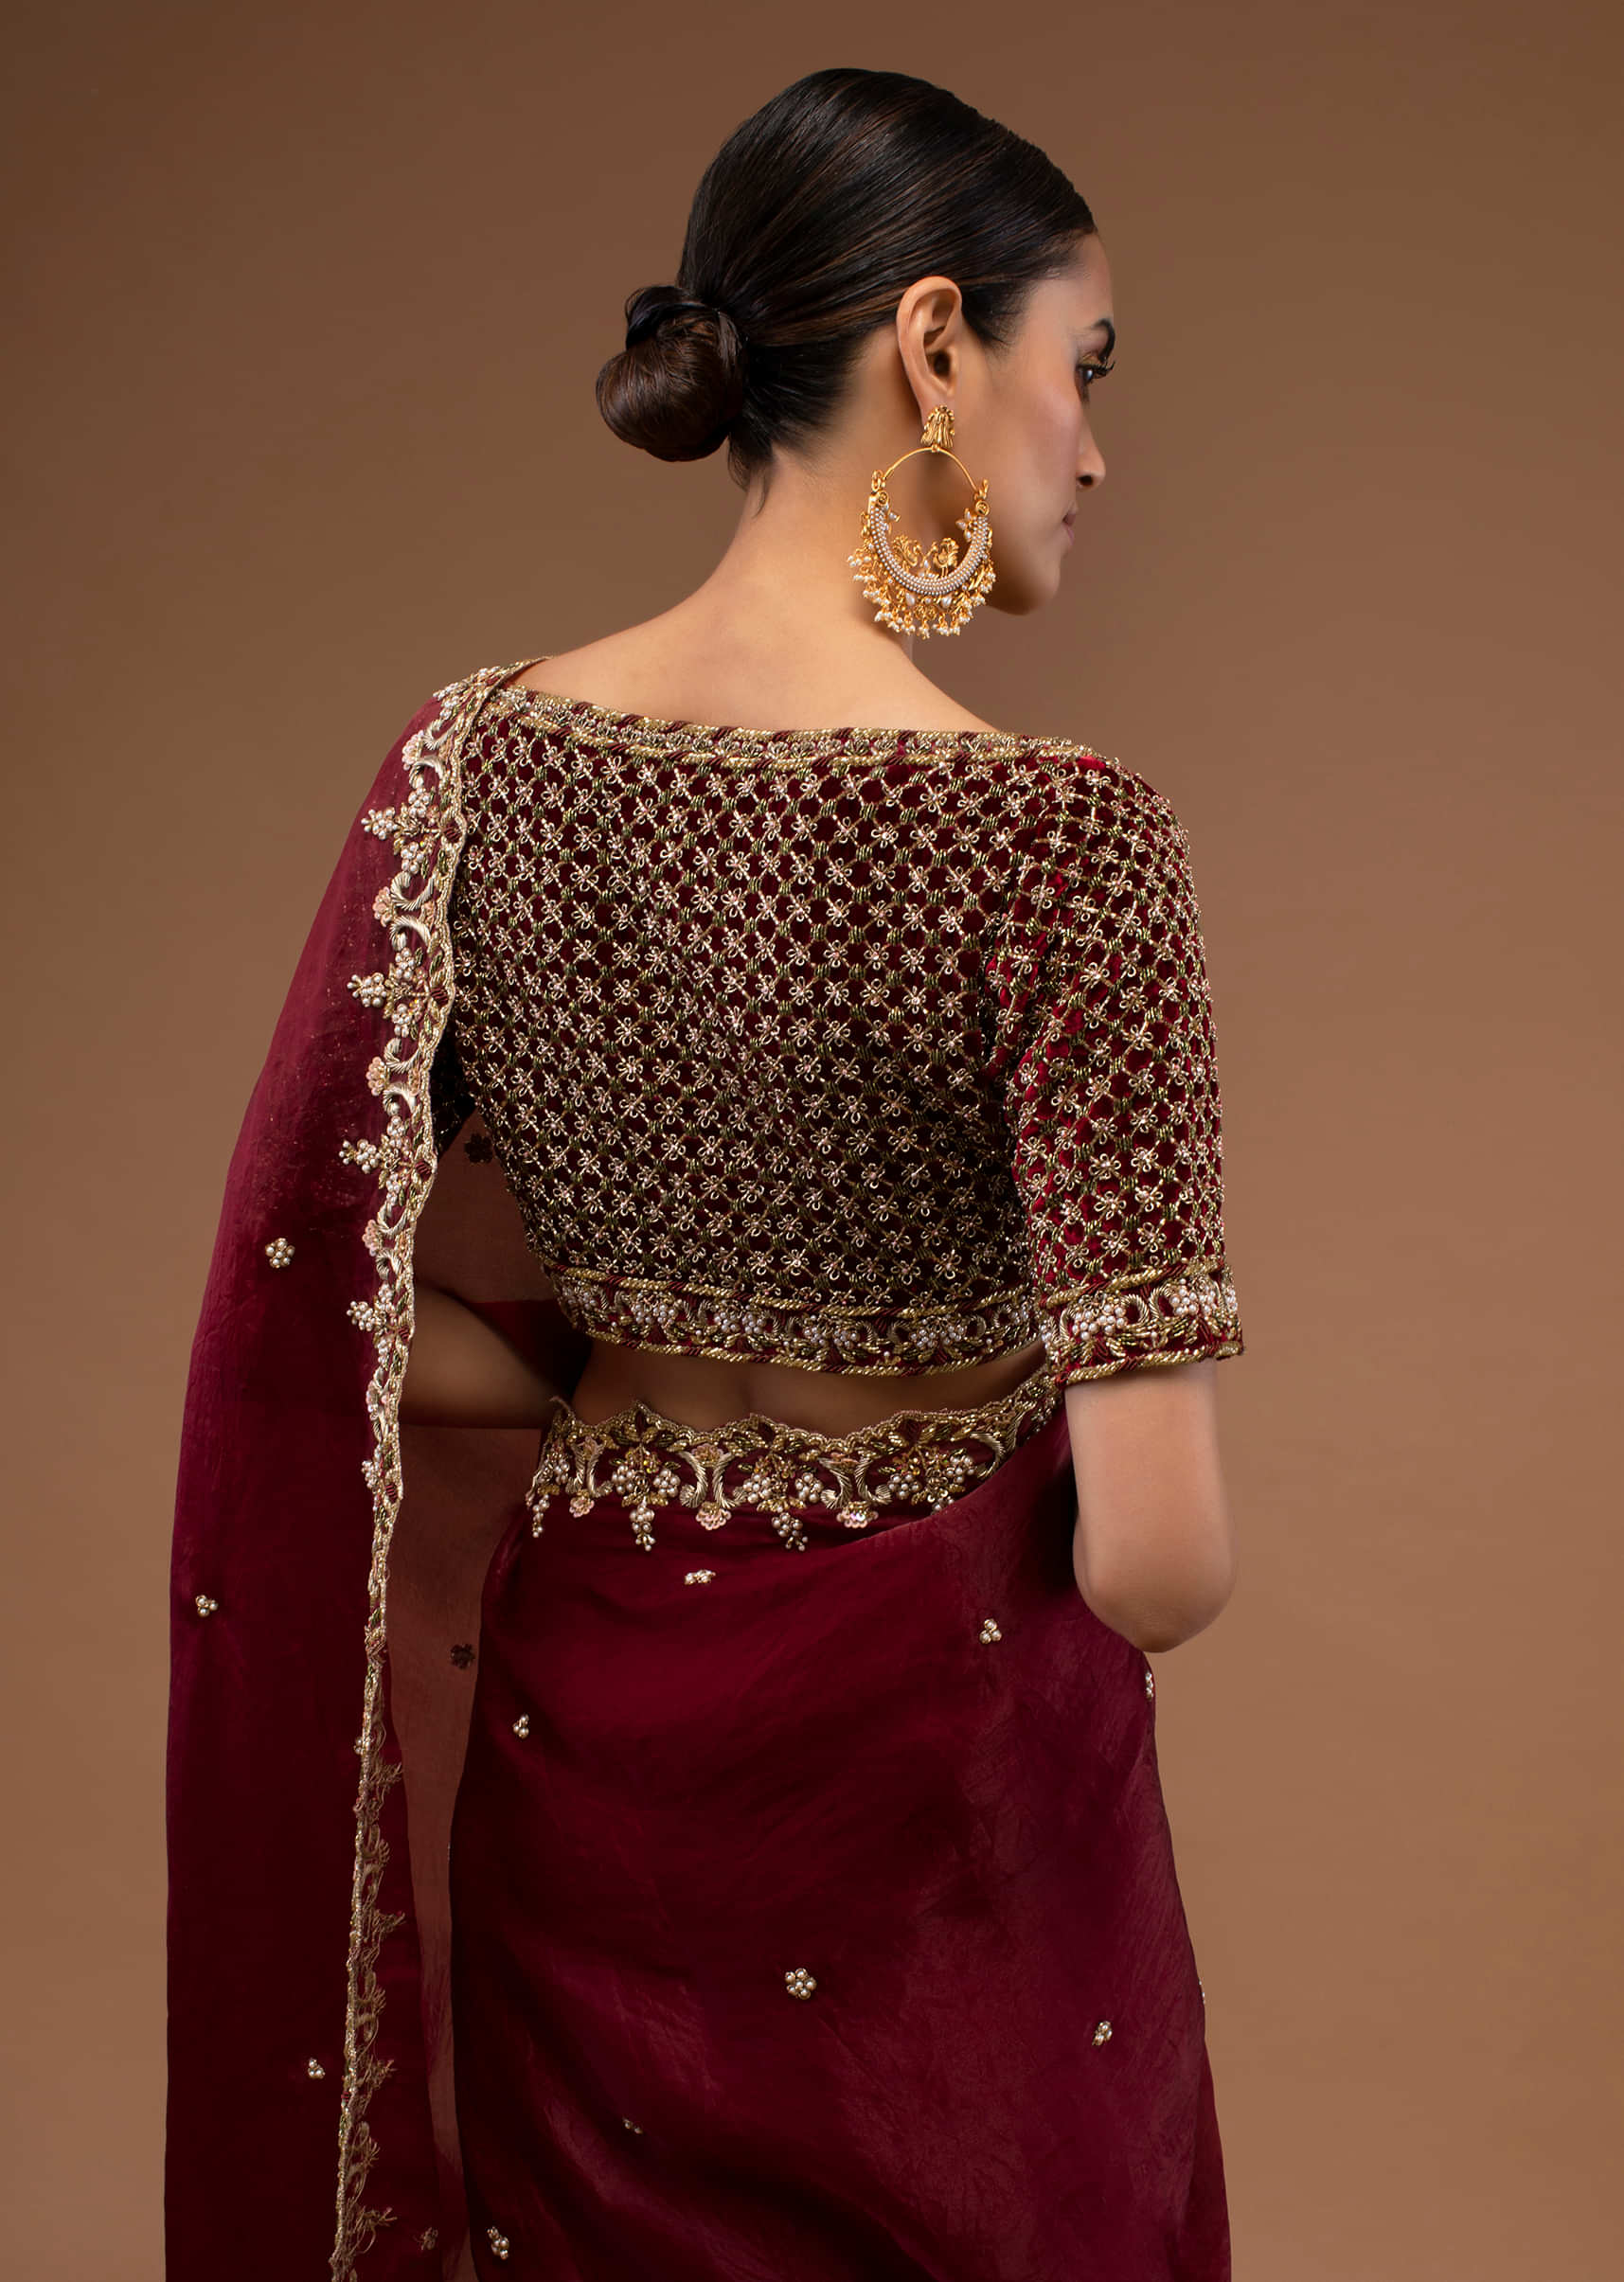 Cardinal Red Organza Saree Set In Zardozi Embroidery, Paired With A Blouse Crafted In Velvet In Half Sleeves